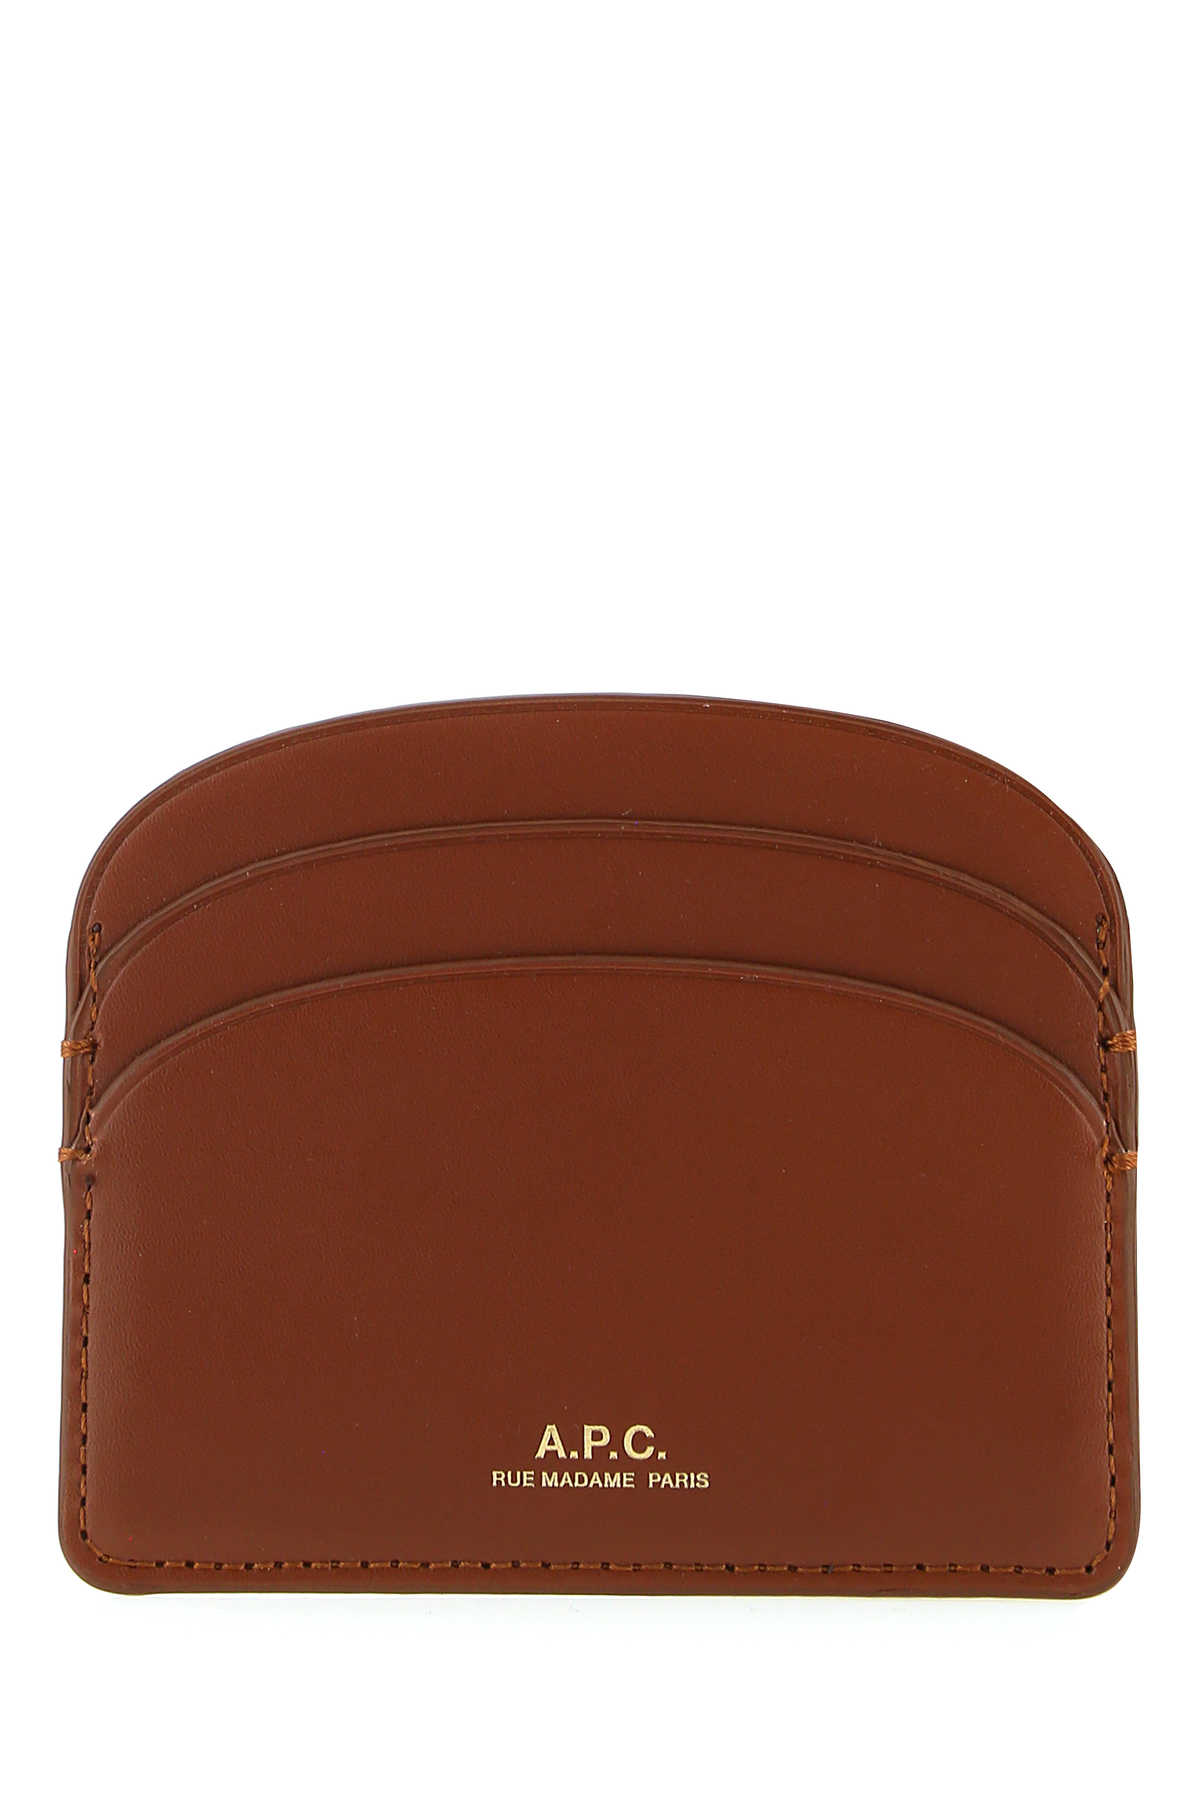 Shop Apc Brown Leather Card Holder In Cad